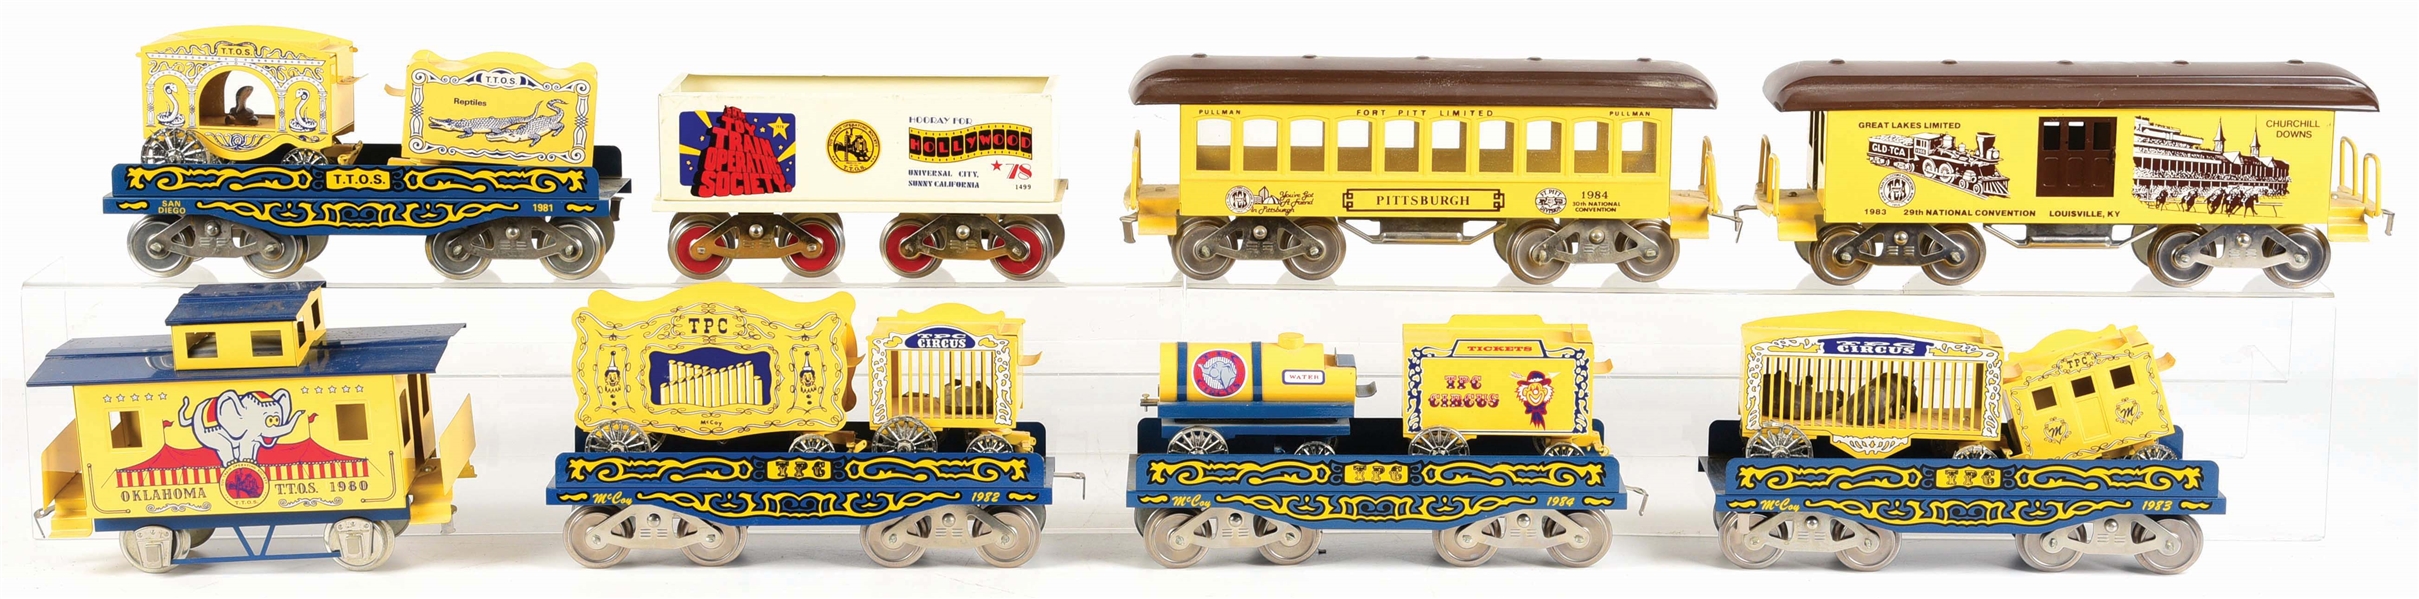 LOT OF CIRCUS-RELATED STANDARD GAUGE TRAINS FROM MCCOY.